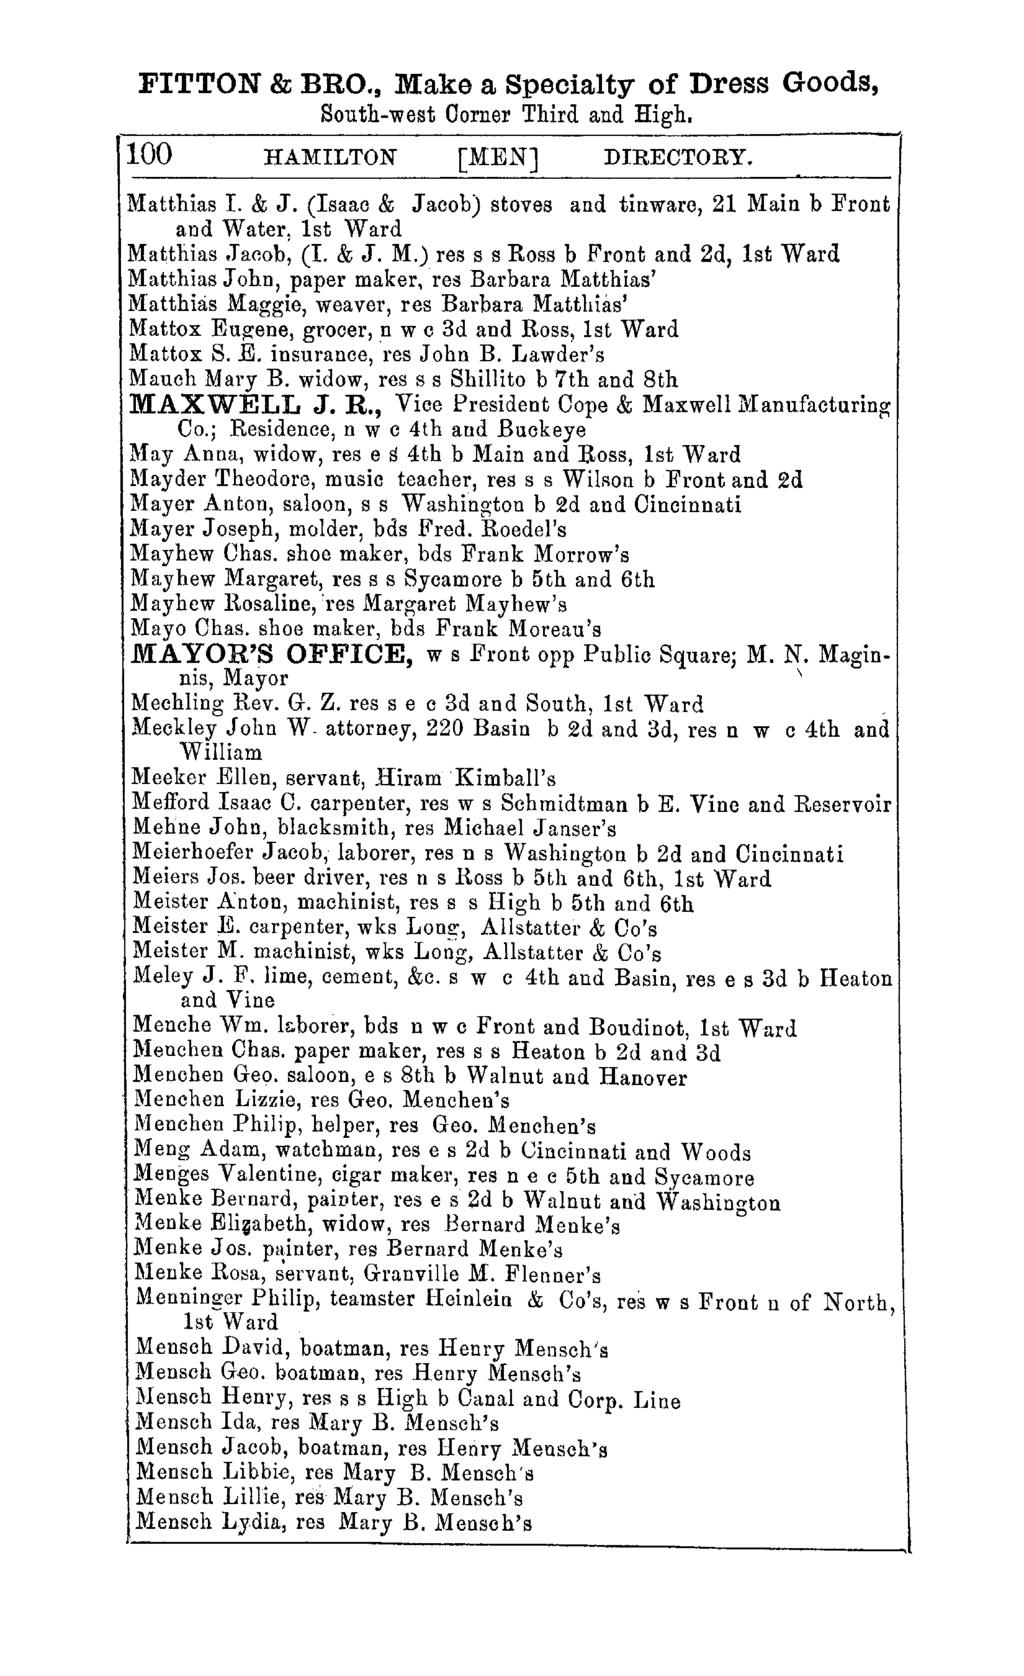 FITTON & BRO., Make a Specialty of Dress Goods, South-west Gorner Third and High. 100 HAMILTON [MEN] DIRECTORY. Matthias I. & J. (Isaac & Jacob) stoves and tinware, 21 Main b Front and Water.